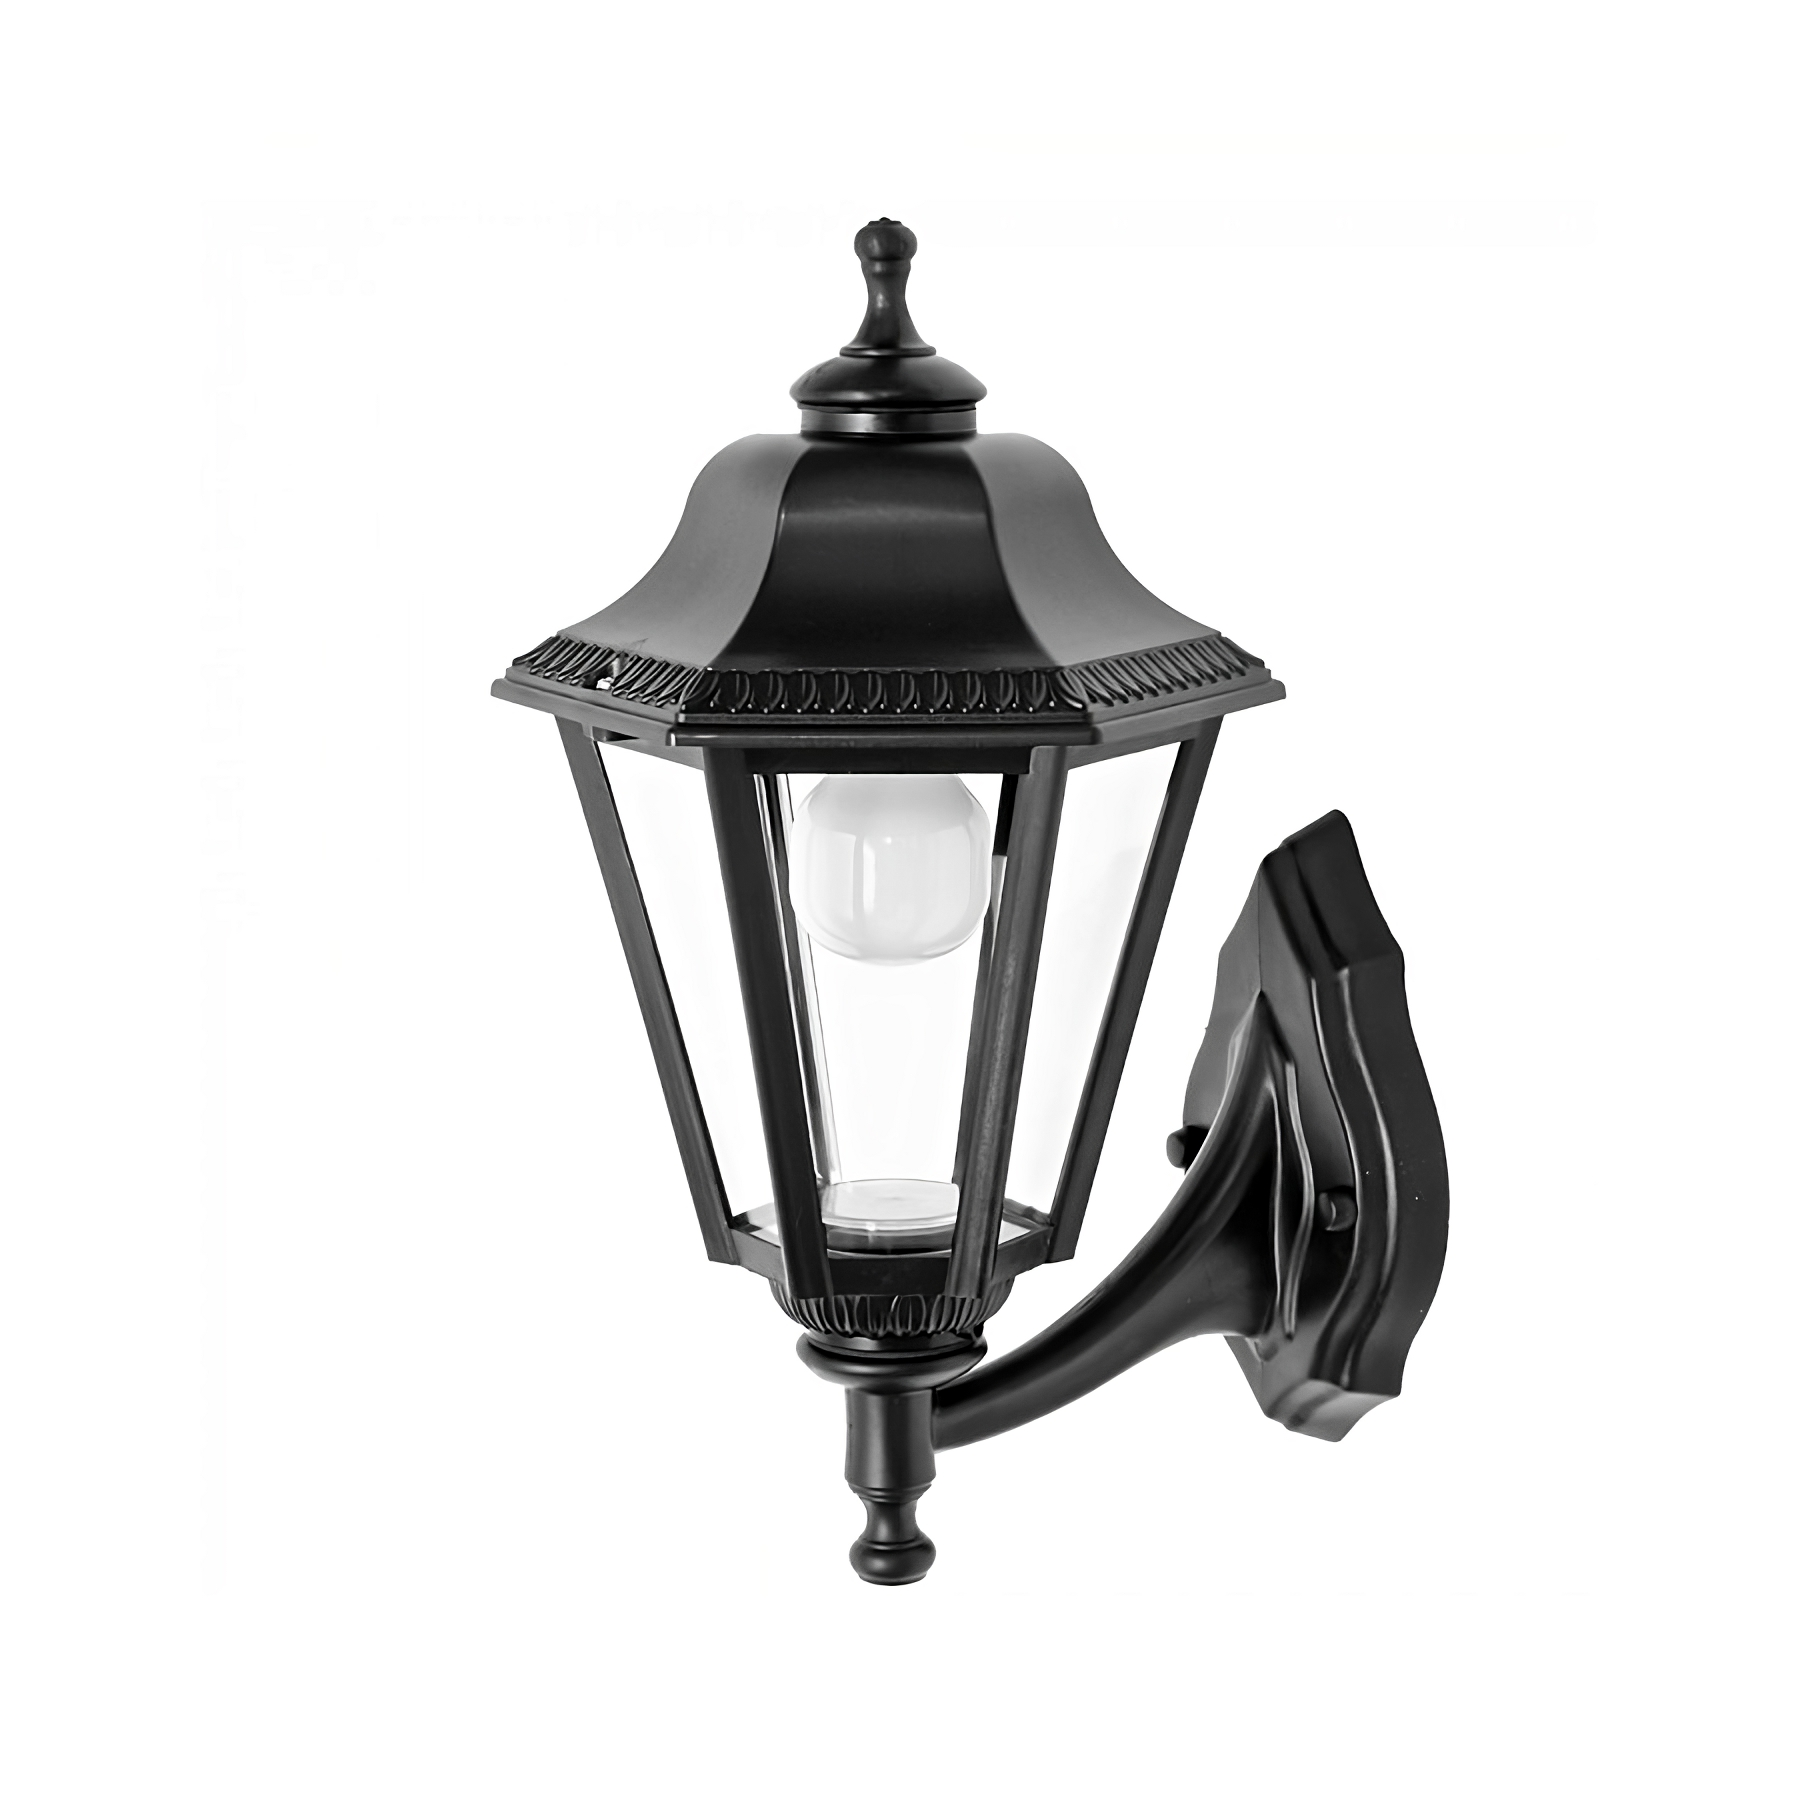 Product image of Castra Black Resin Exterior Coach Lantern